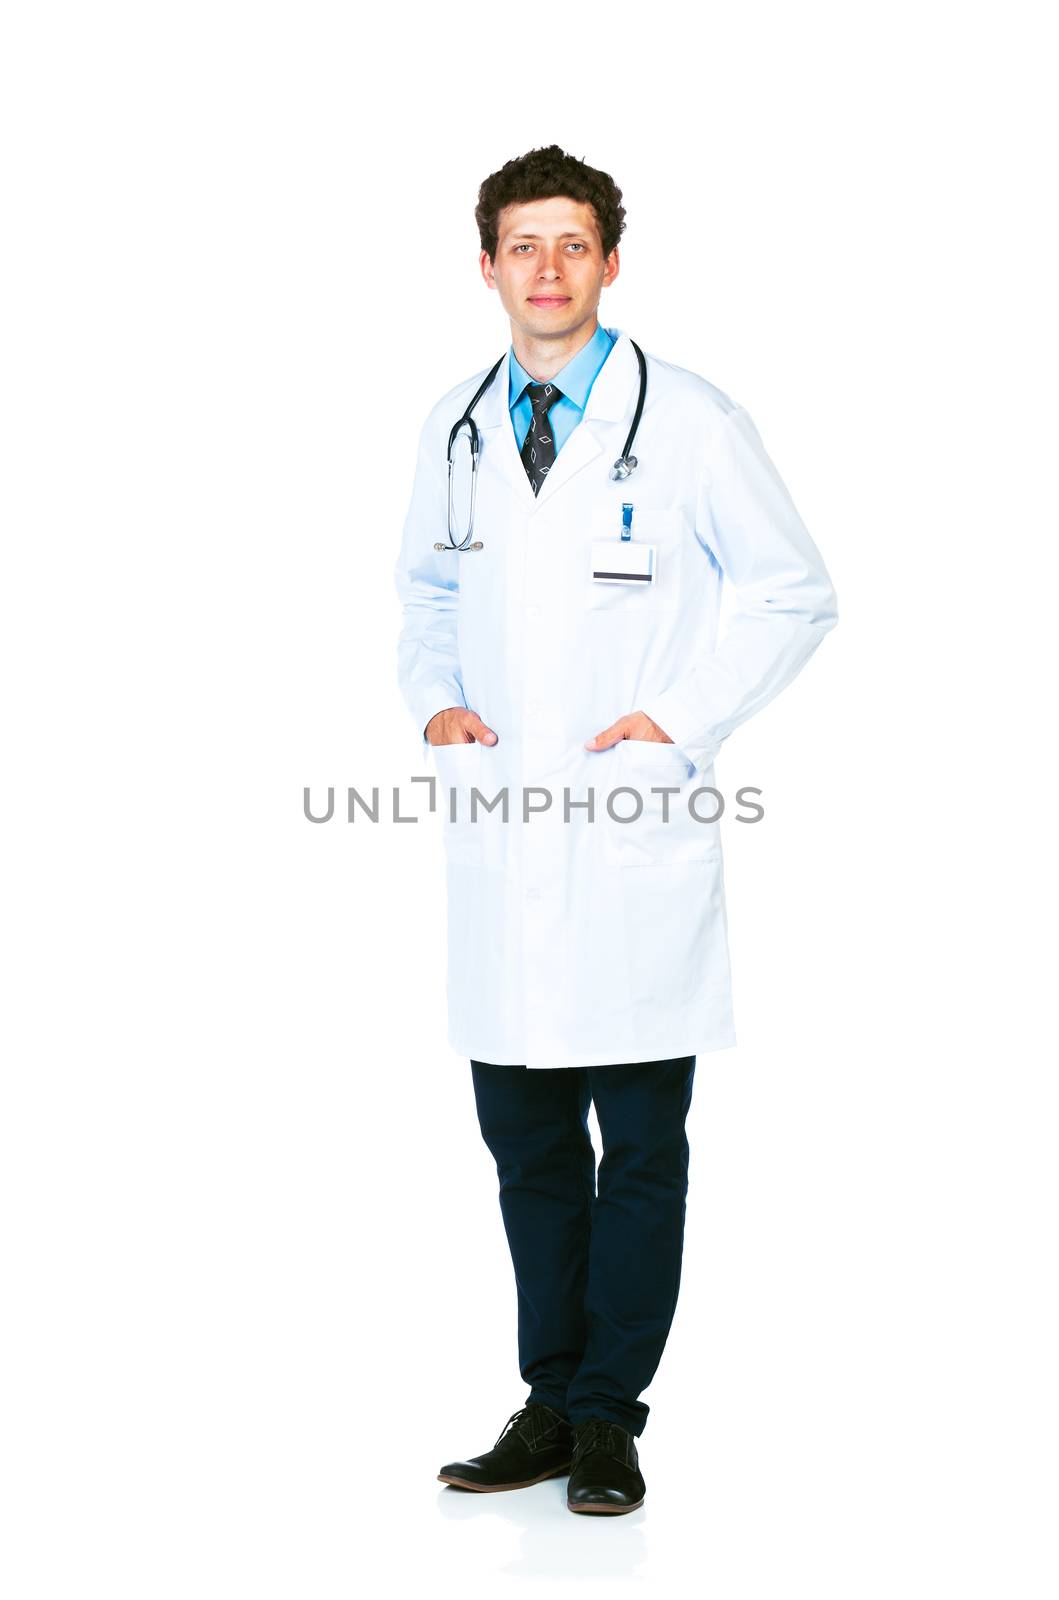 Full length portrait of the smiling doctor standing on a white background